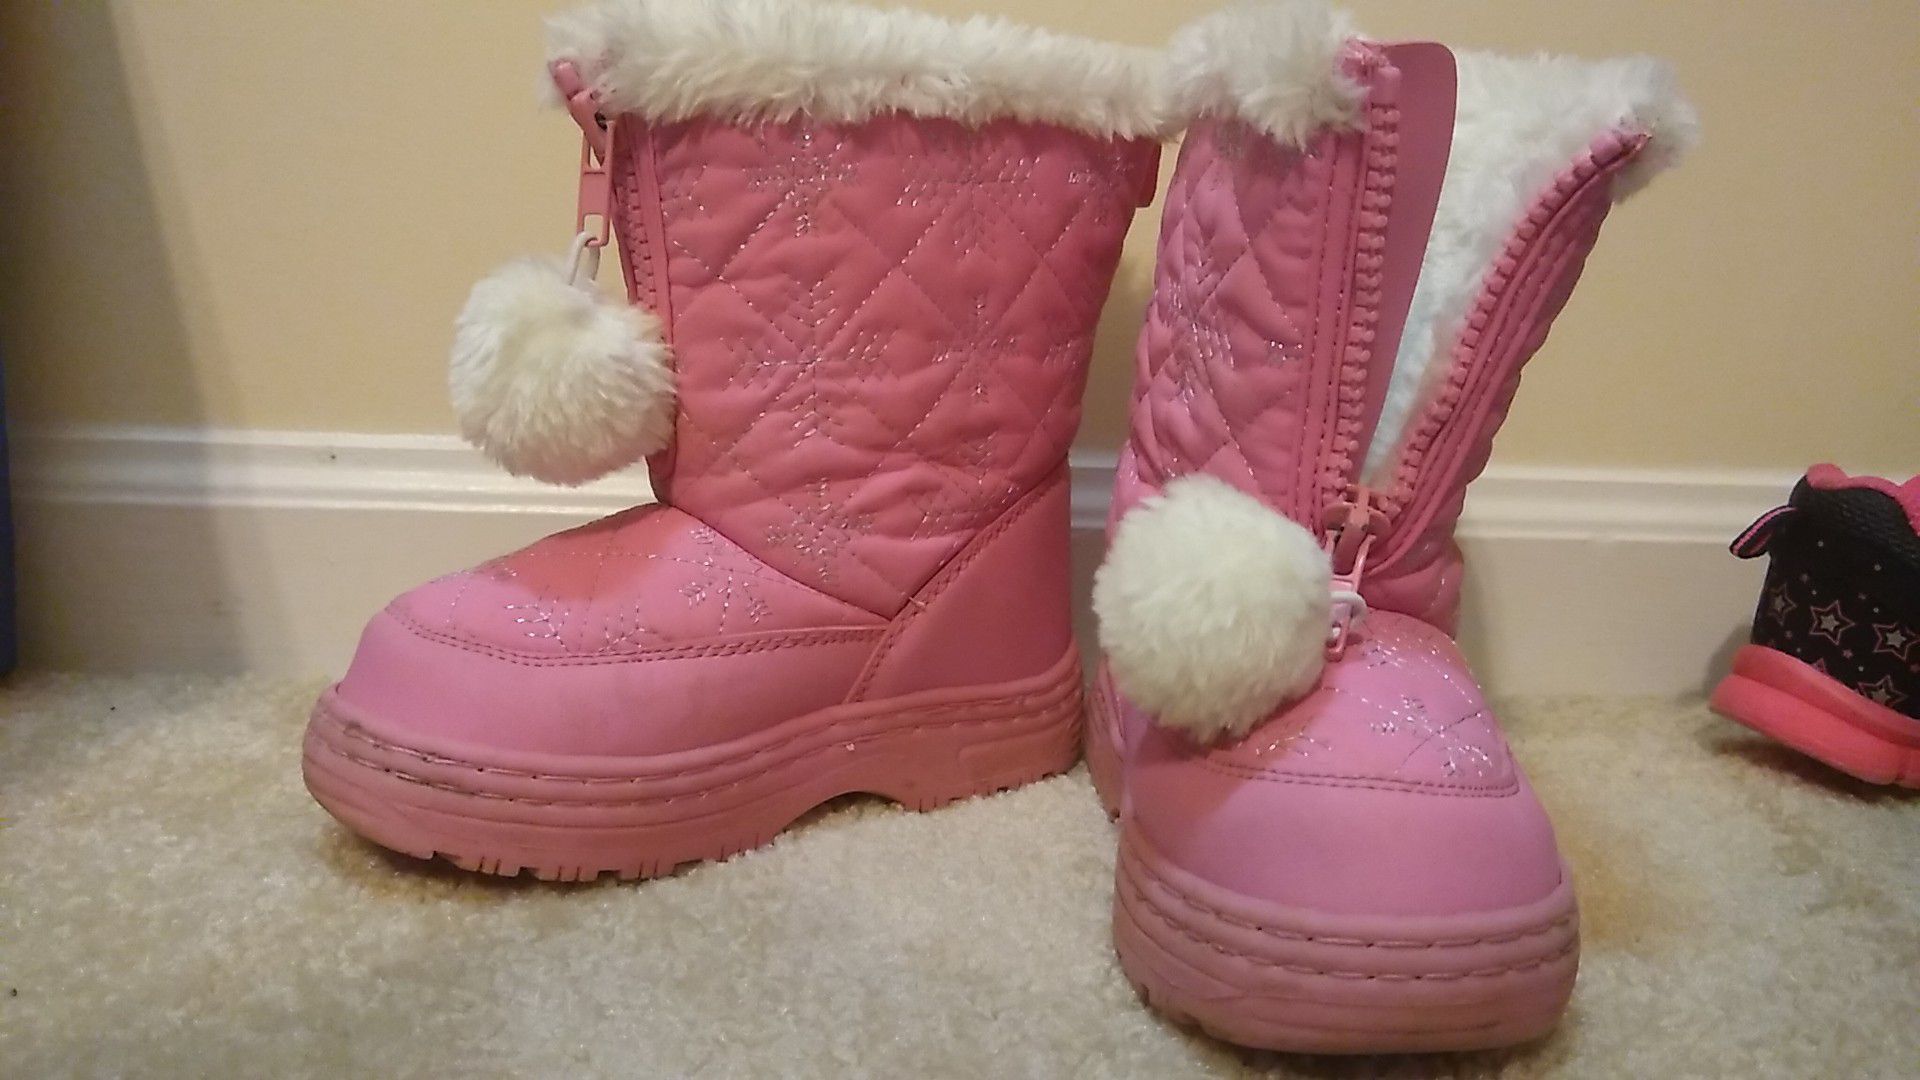 Thinsulate insulated size 9 toddler snow boots